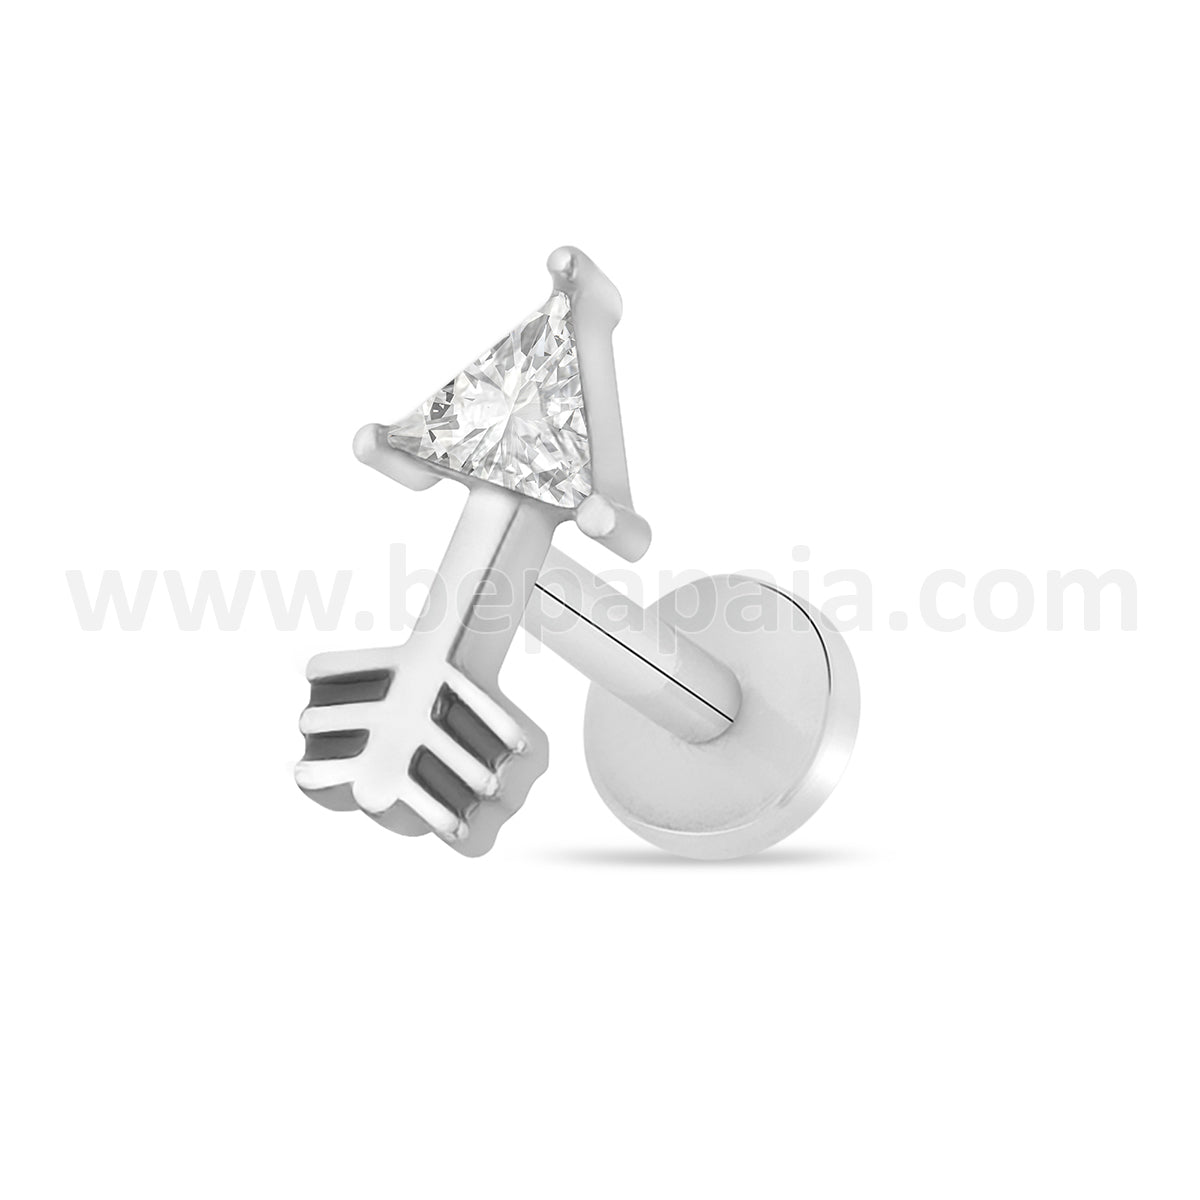 Surgical steel tragus ethnic piercing